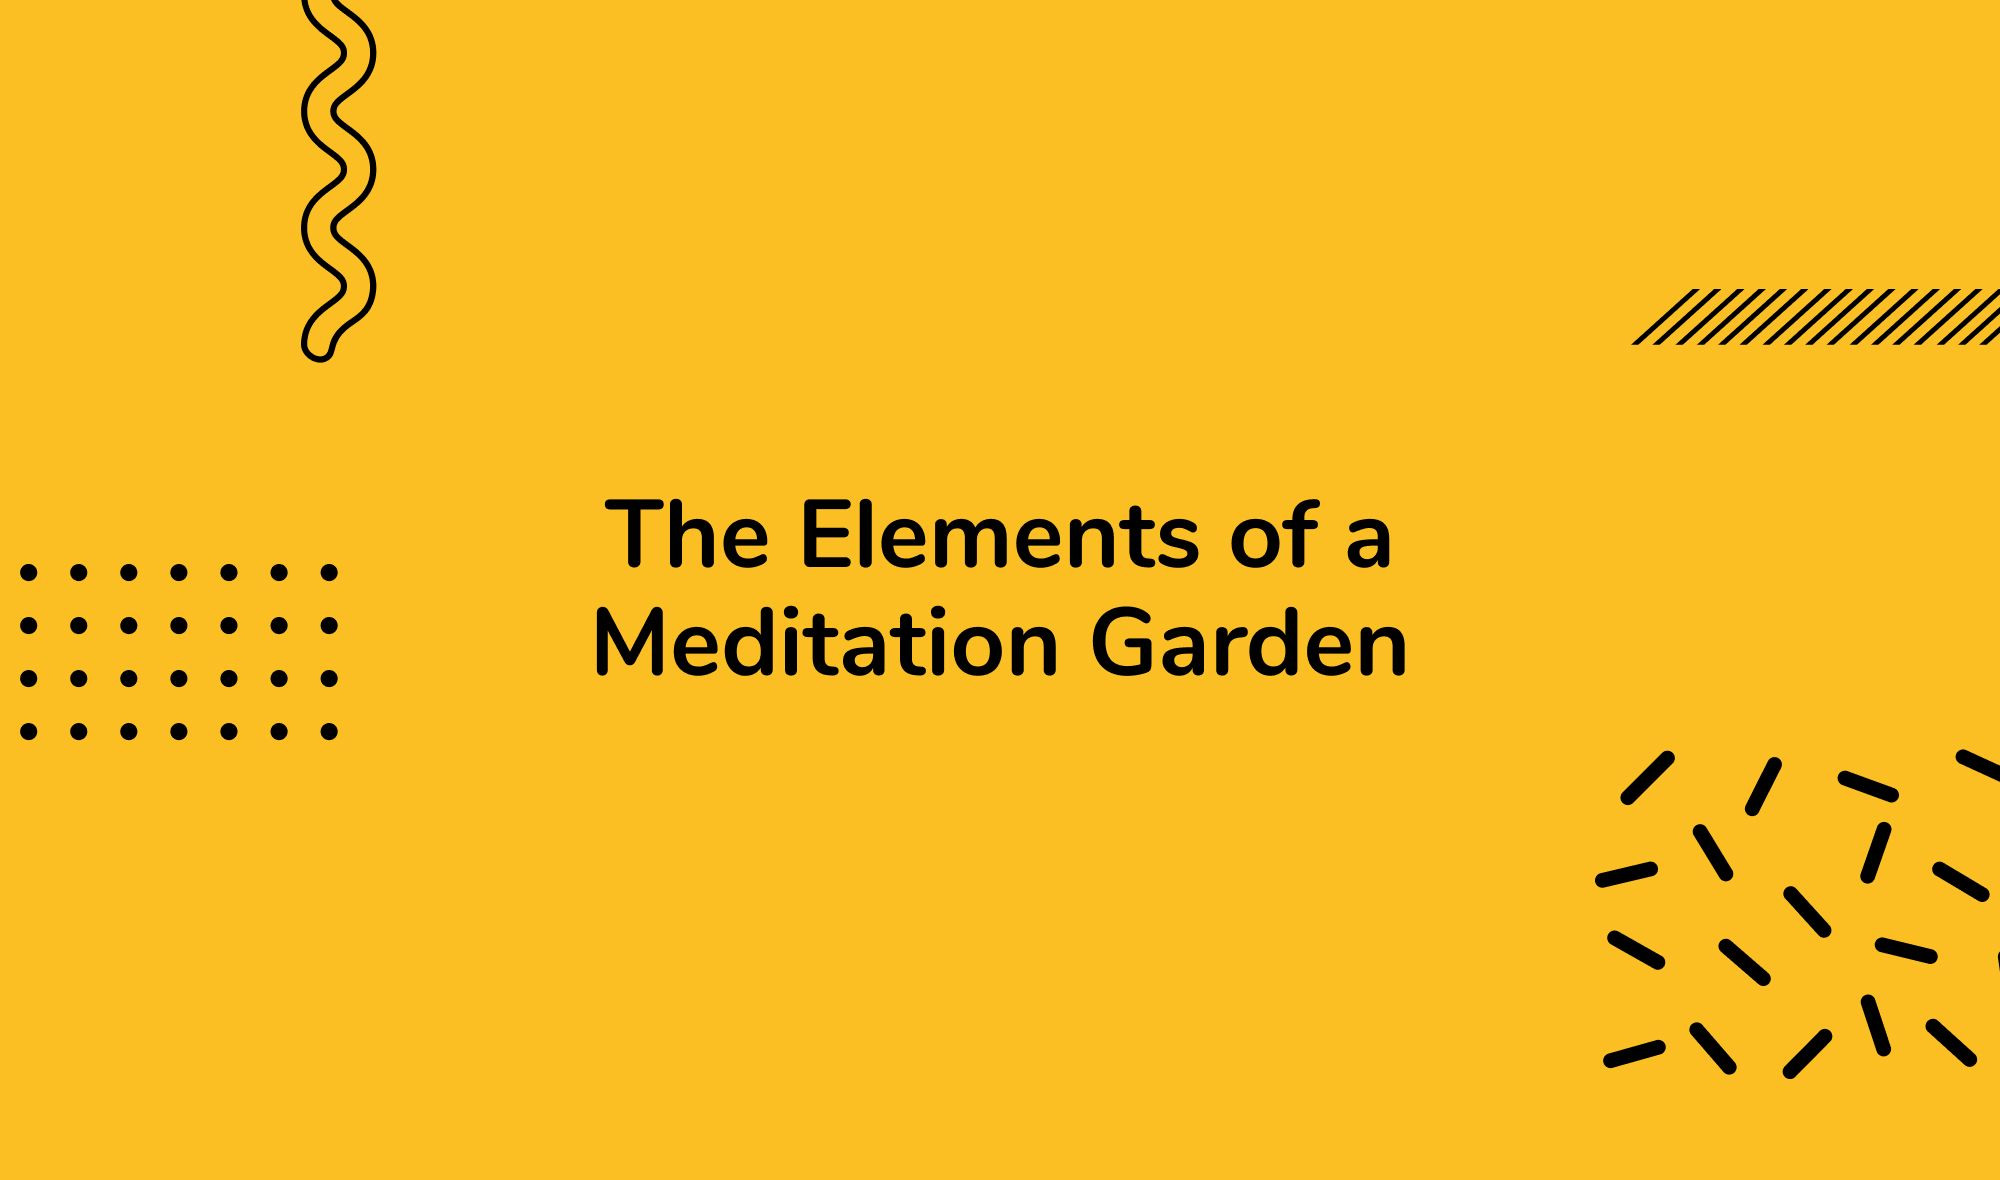 The Elements of a Meditation Garden